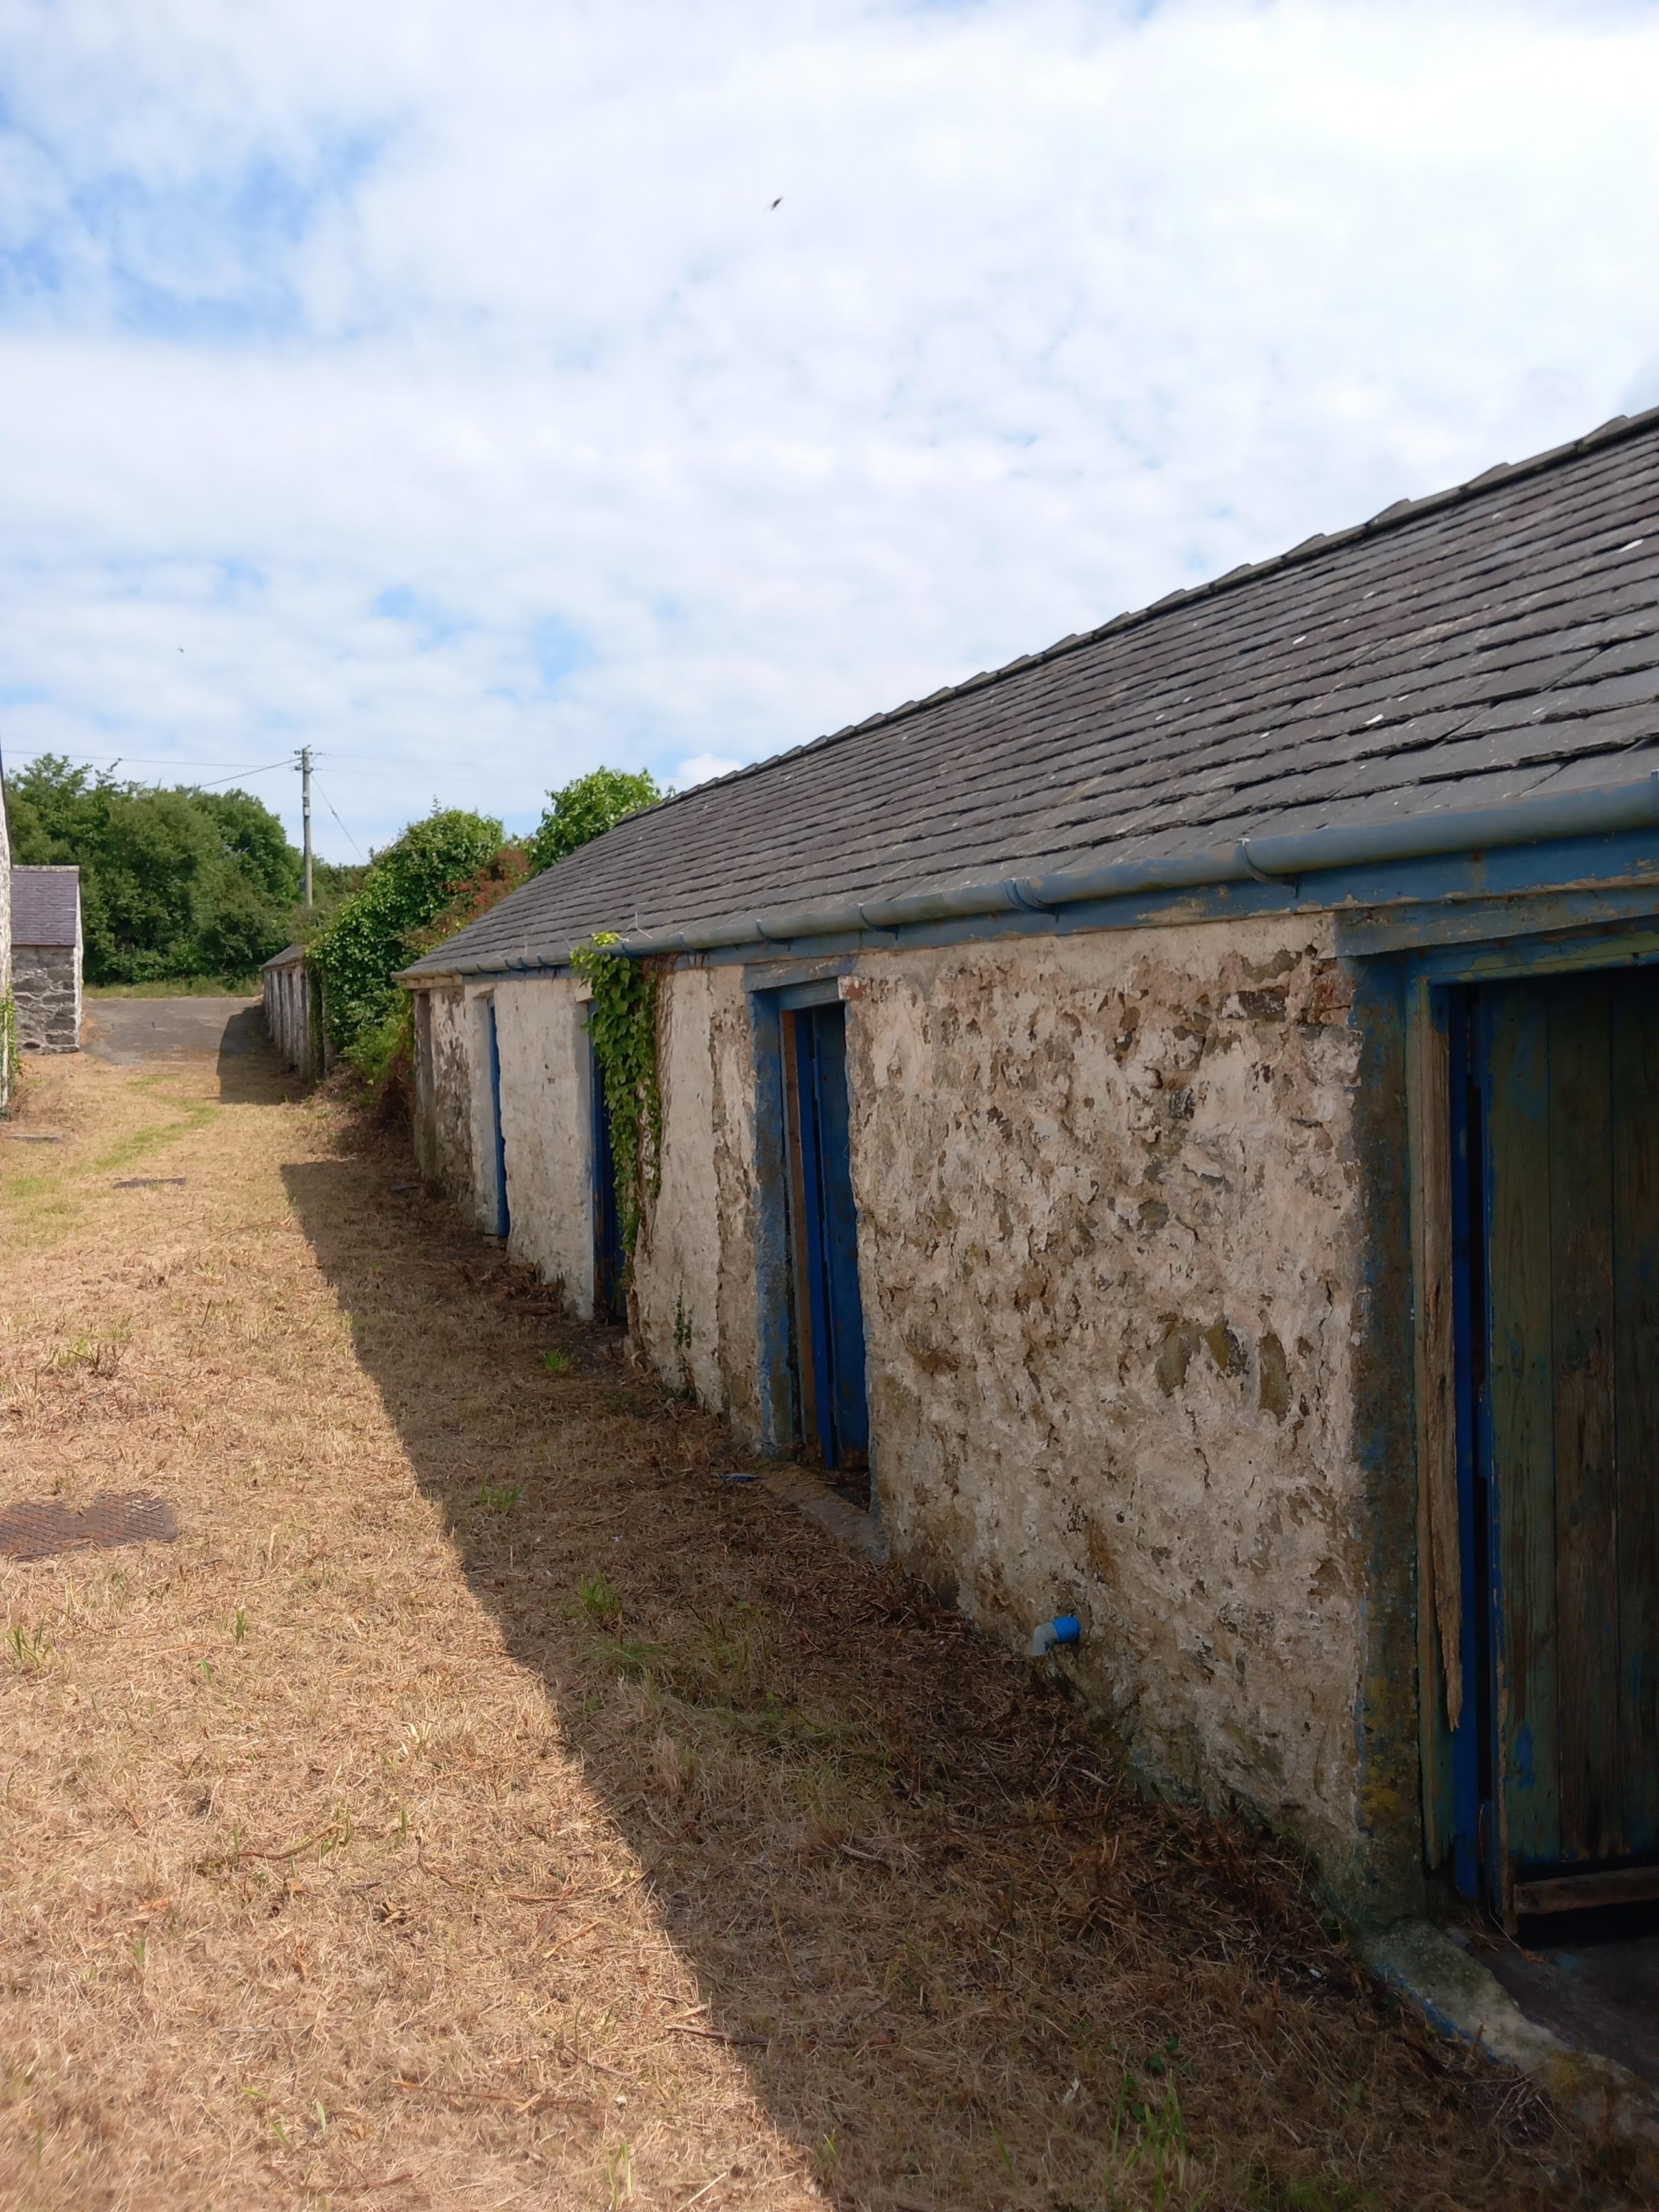 The row of sheds opposite the Penmynydd Almshouses - they were added in the 19th century and were used for storage and as wash houses Image Dale Spridgeon